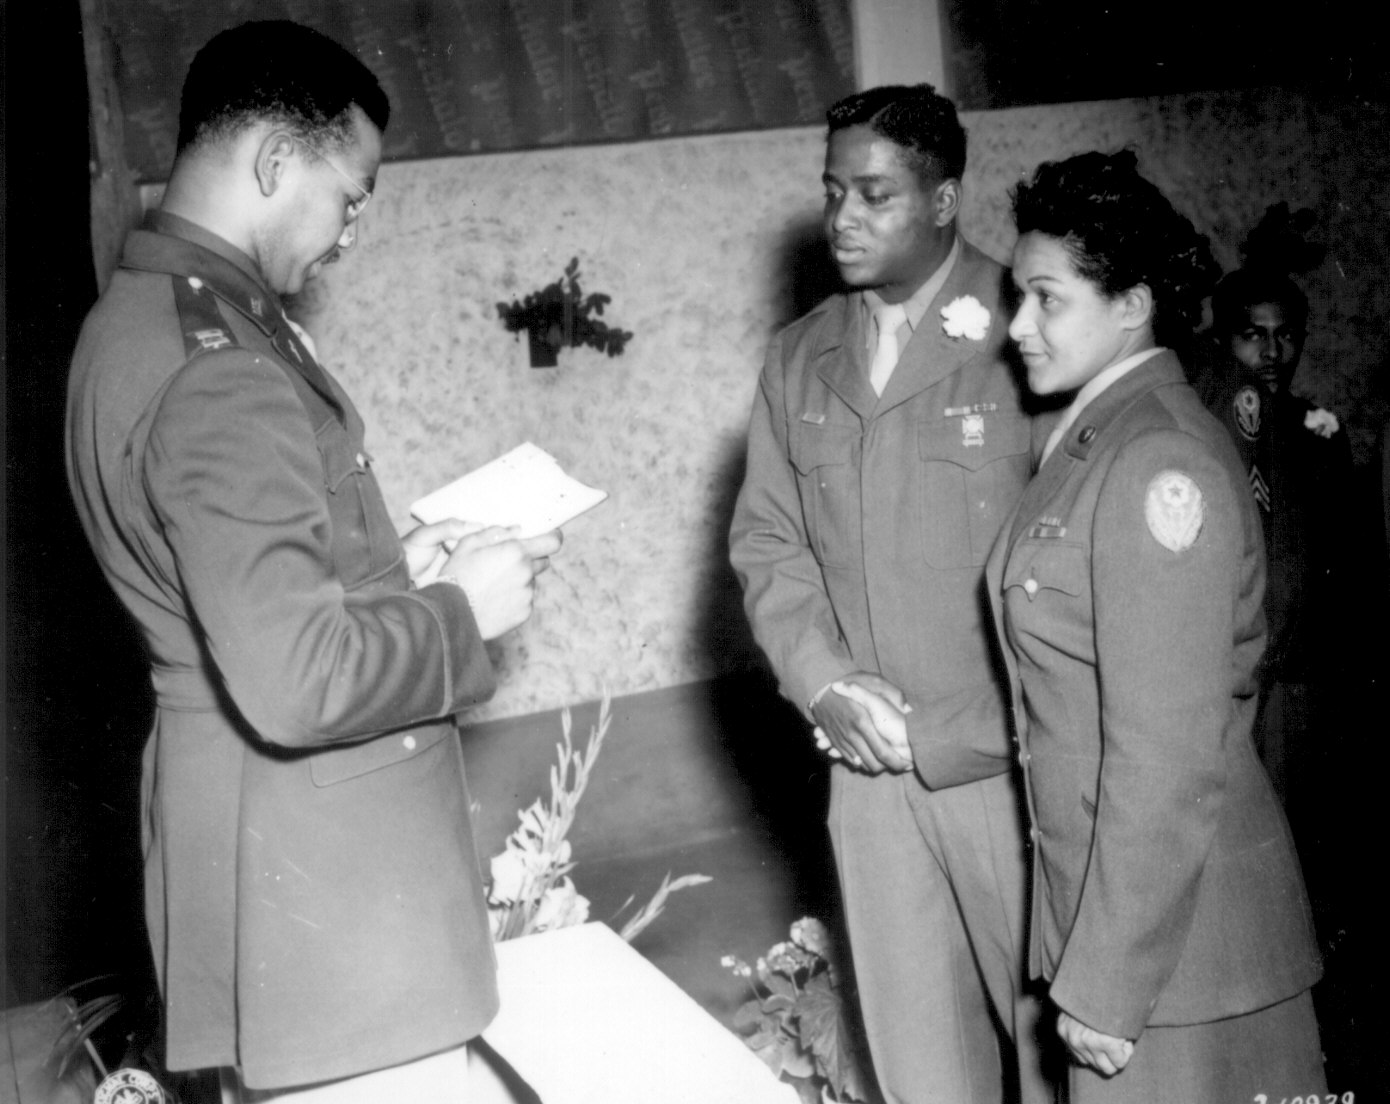 African-American US Army Chaplain Wm Green presiding over wedding of Pfc Florence Collins (6888th Postal Directory Bn) and Cpl Wm Johnson (1696th Labor Supervision Co), Rouen, France, 19 Aug 1945